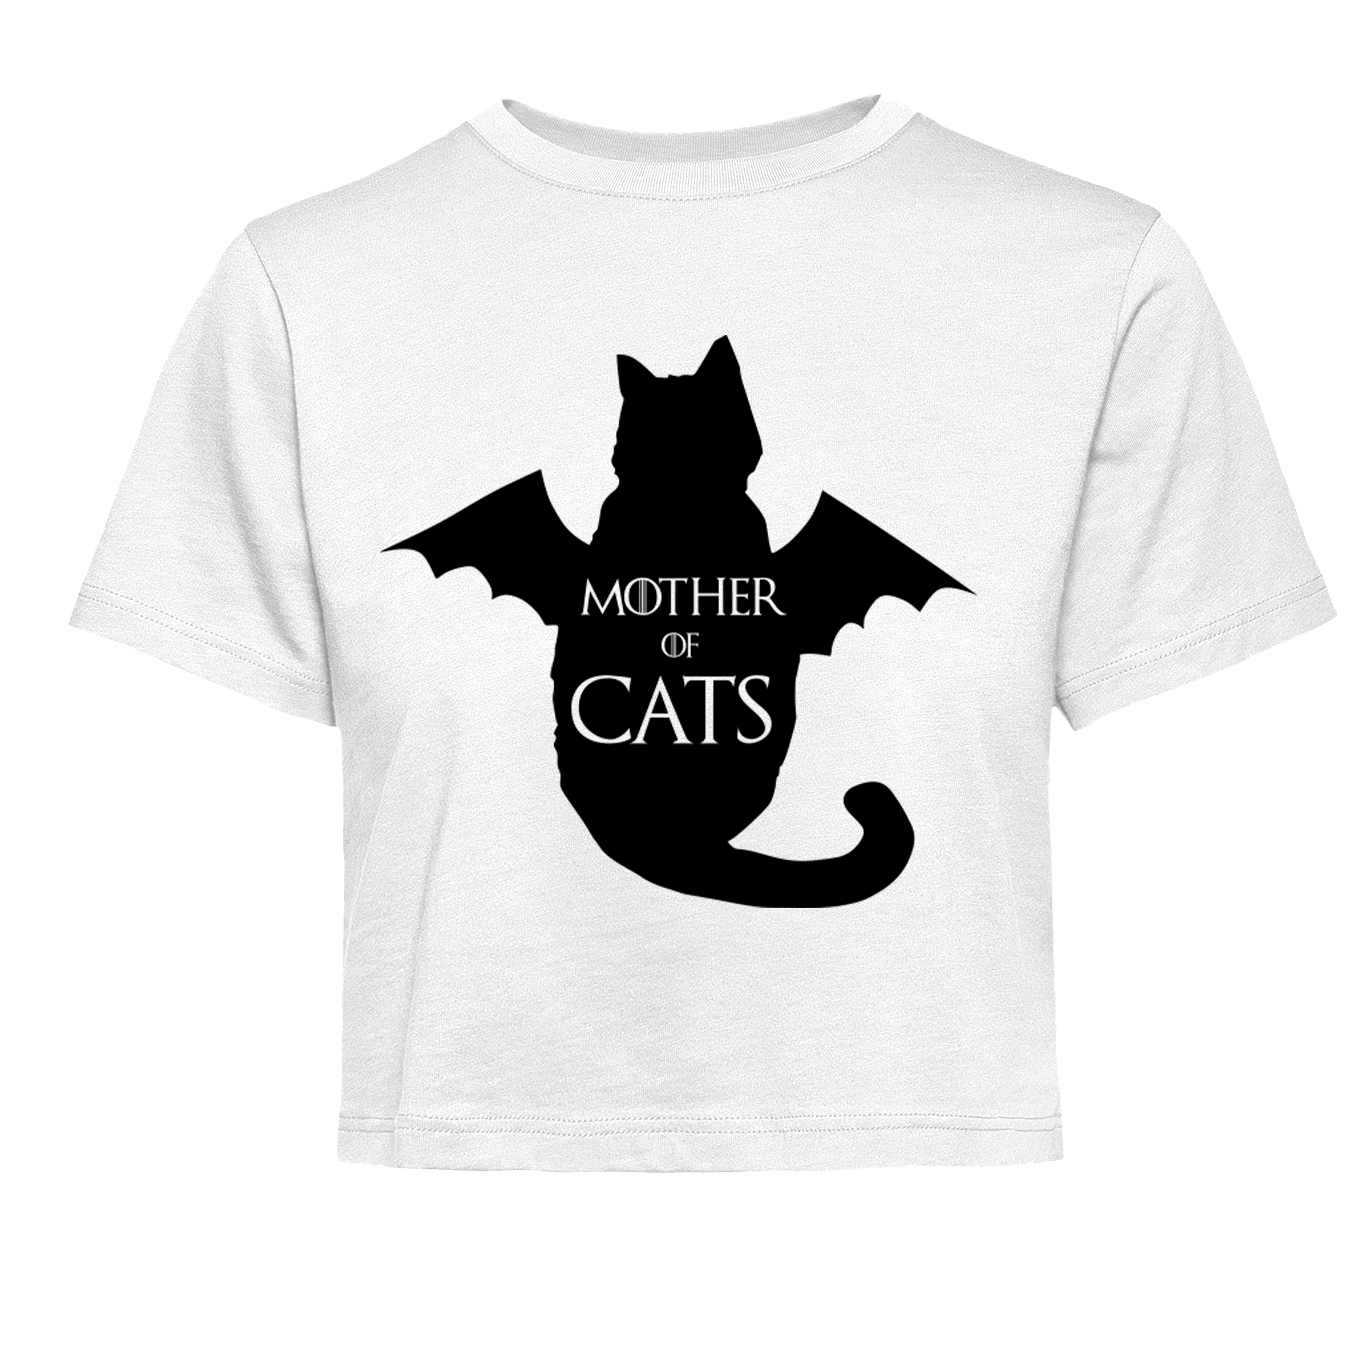 T-shirt "Mother of Cats"